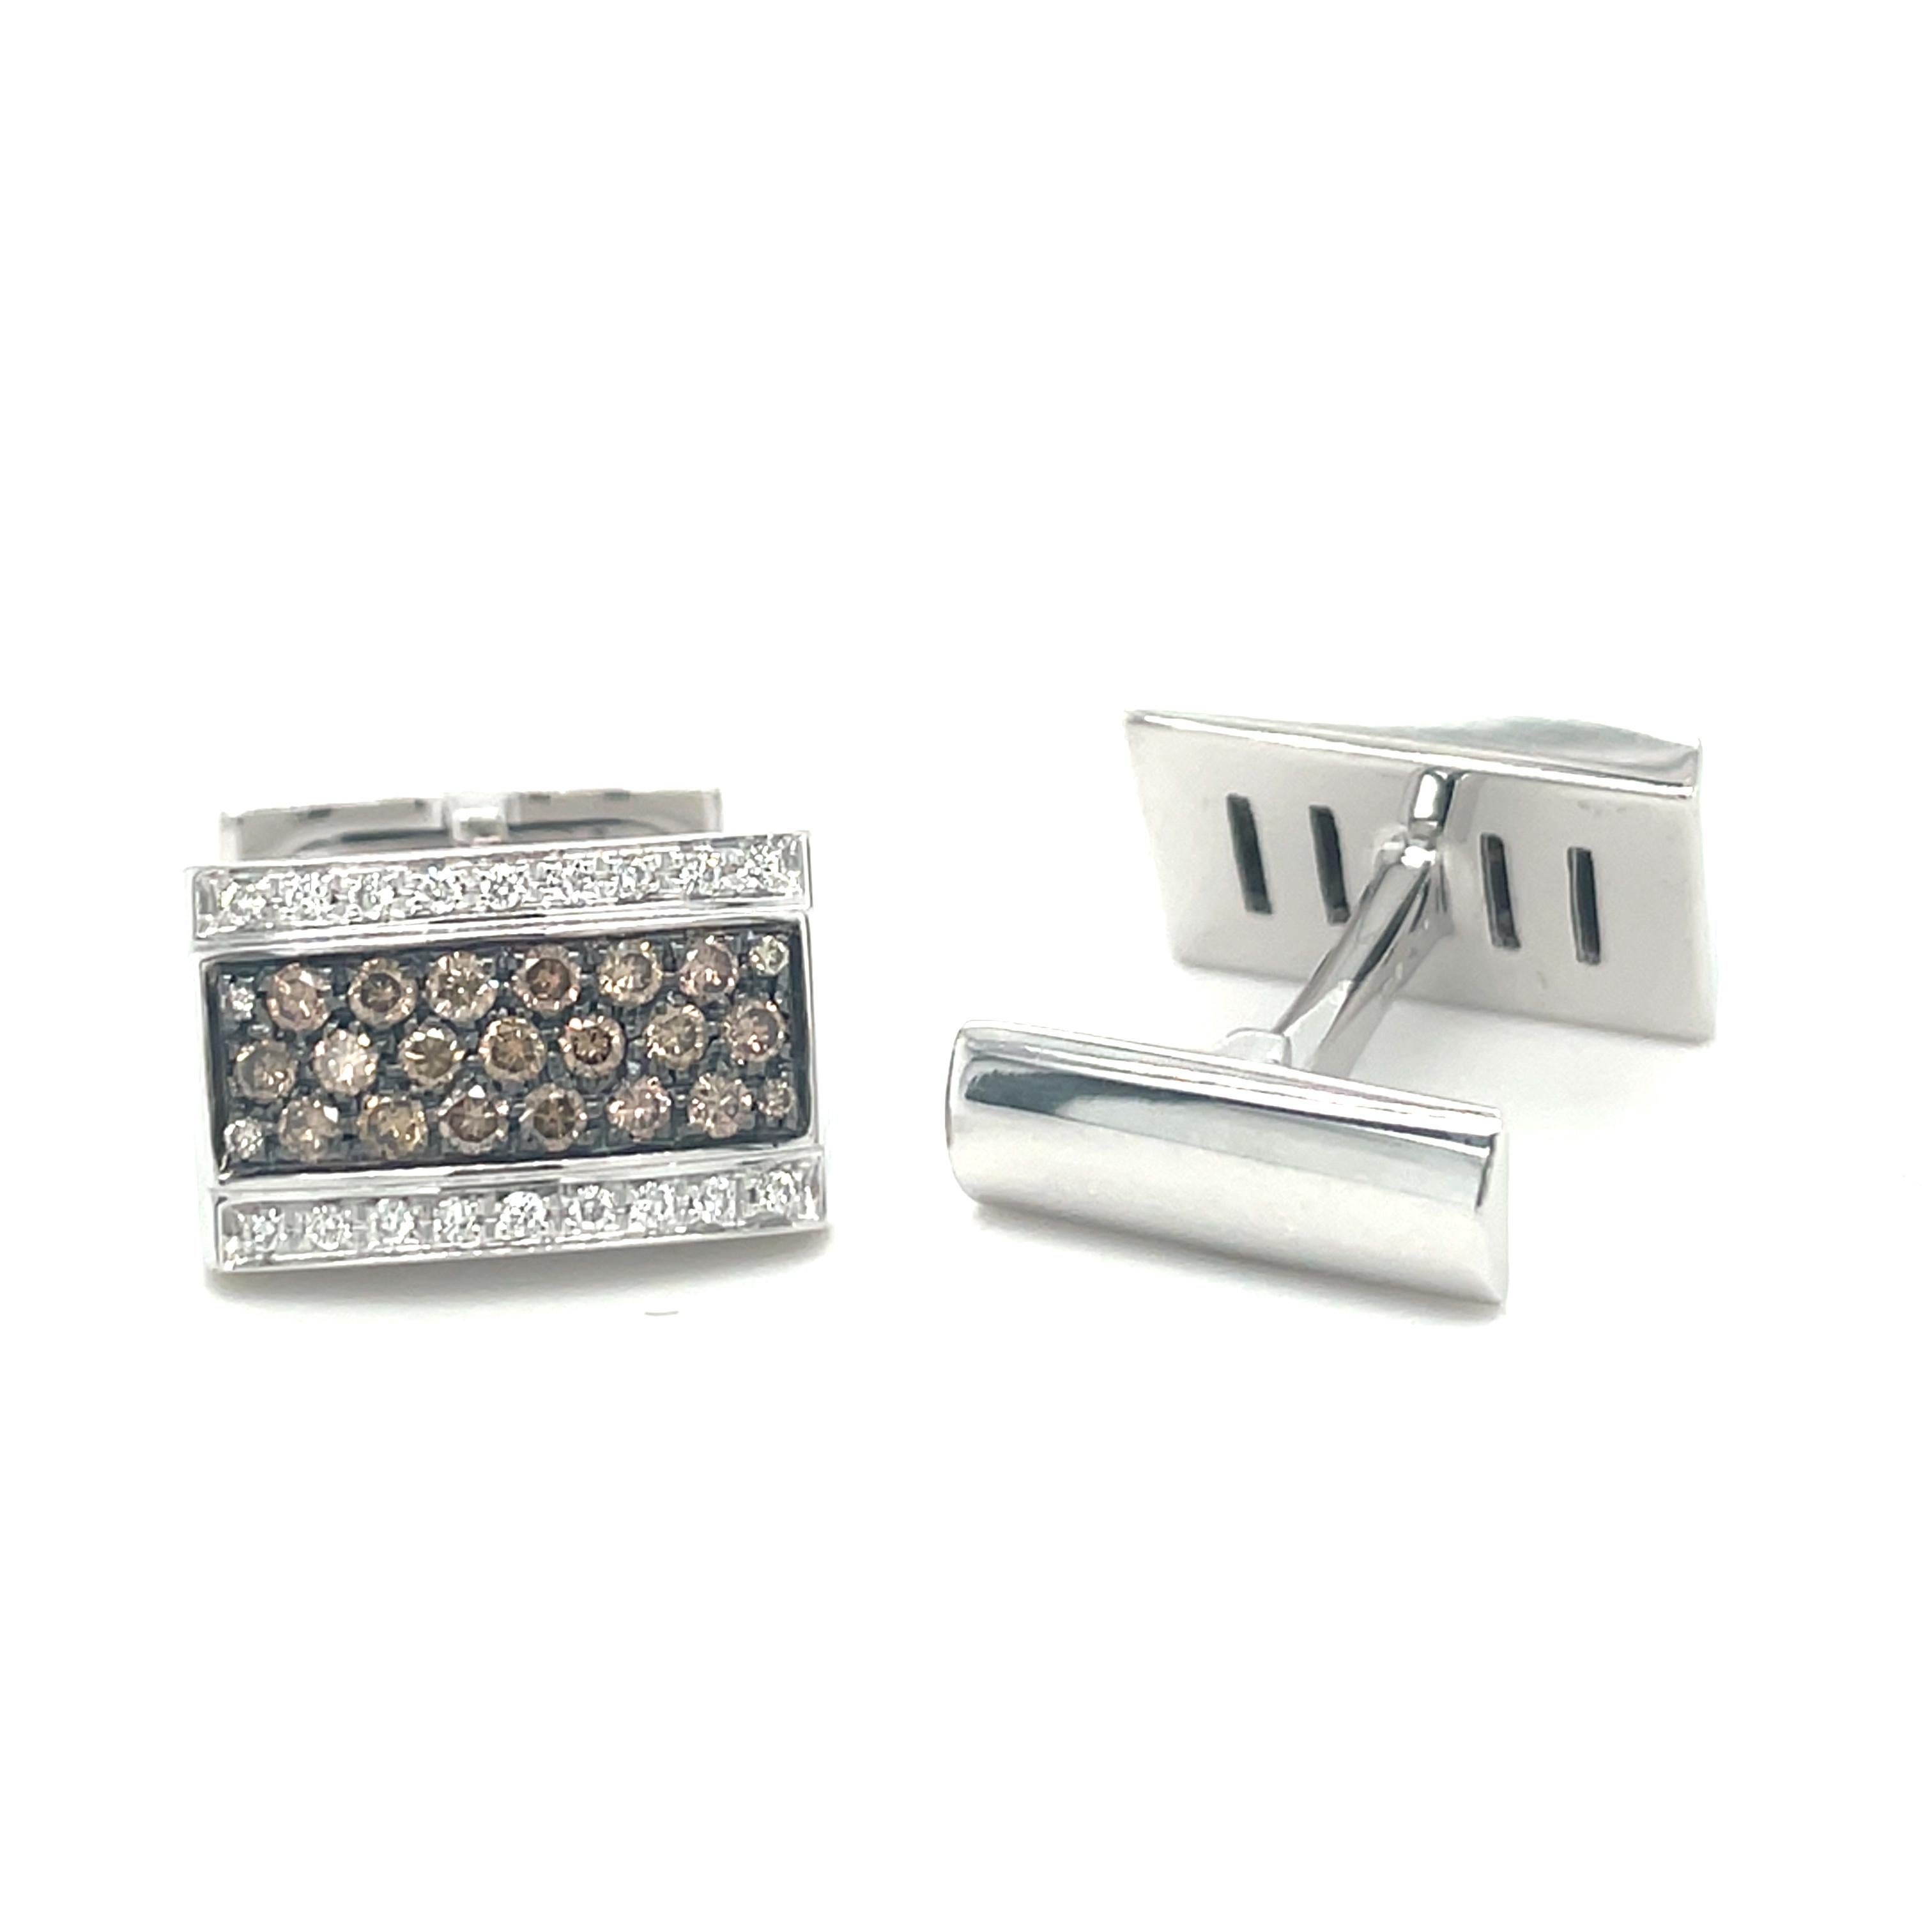 These white gold cufflinks are from Men's Collection. These cufflinks are decorated with White gold, diamond G color VS clarity 0.29 ct and brown diamonds 0.98 ct. The dimensions of the cufflinks are 1.5cm x 1cm. These cufflinks are a perfect